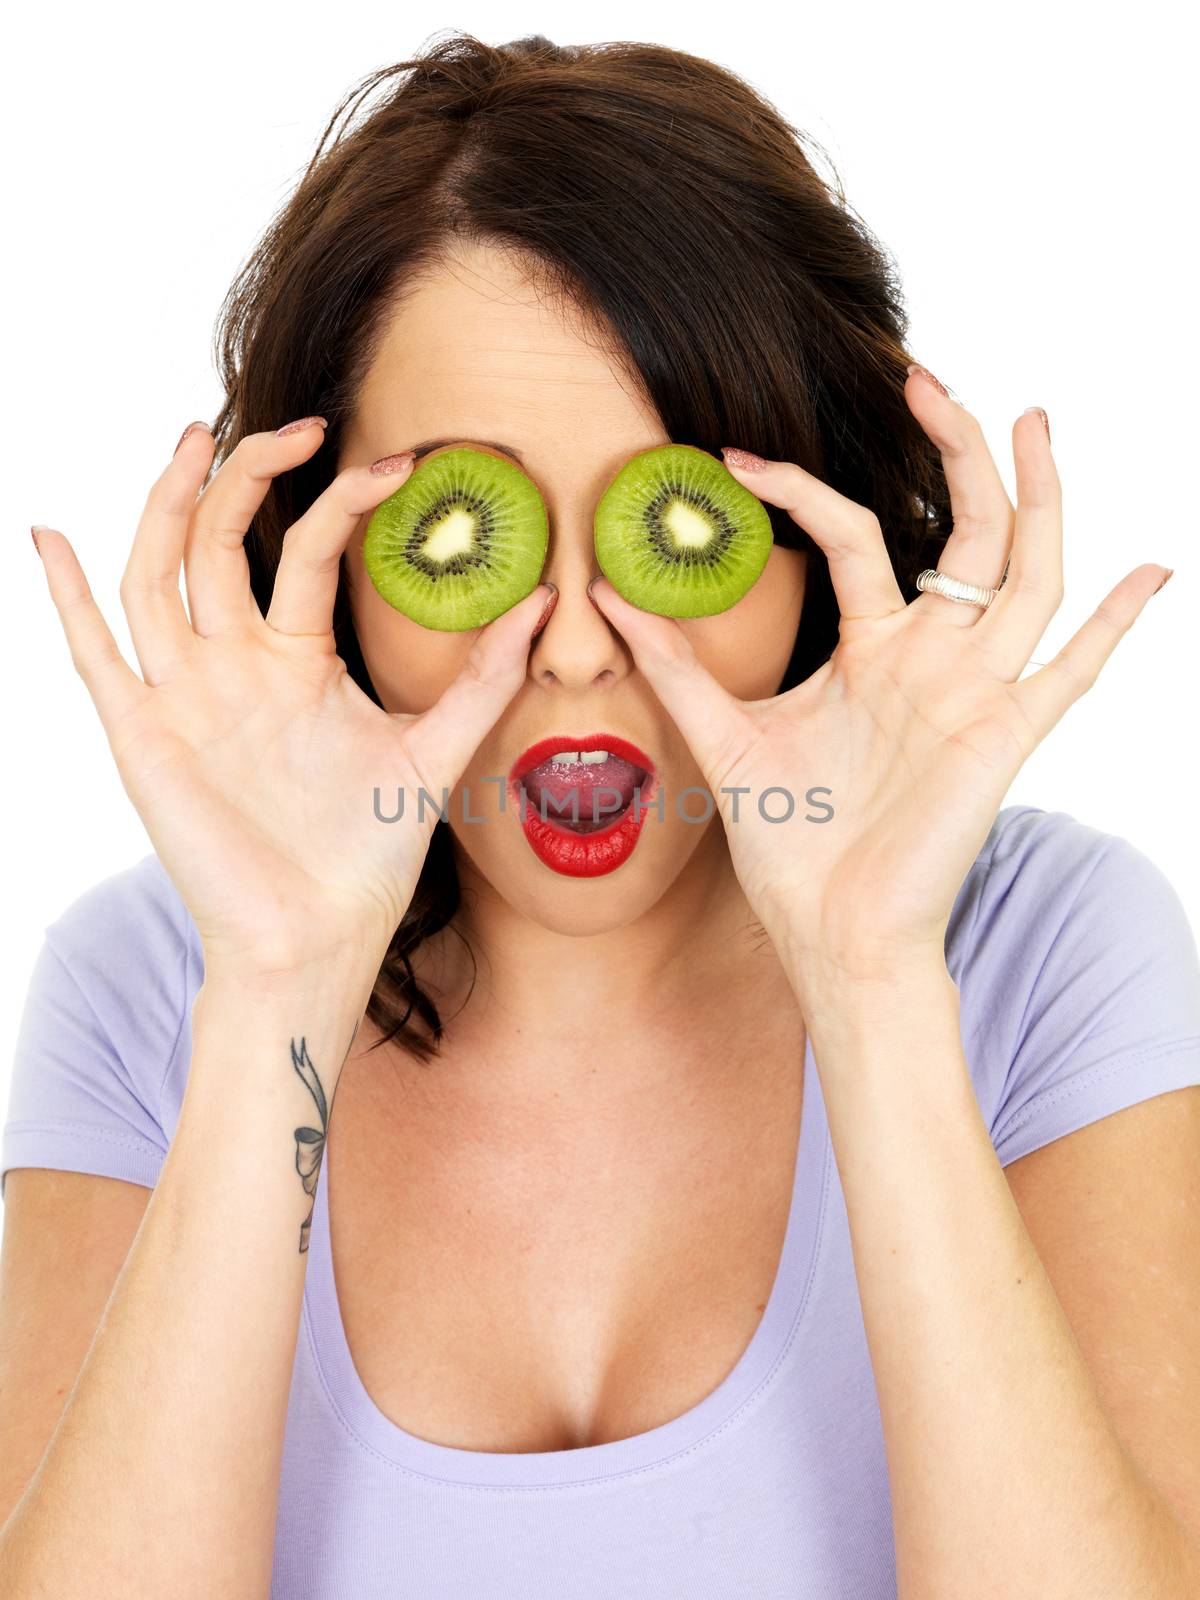 Shocked Young Woman Covering Eyes with Kiwi Fruit by Whiteboxmedia